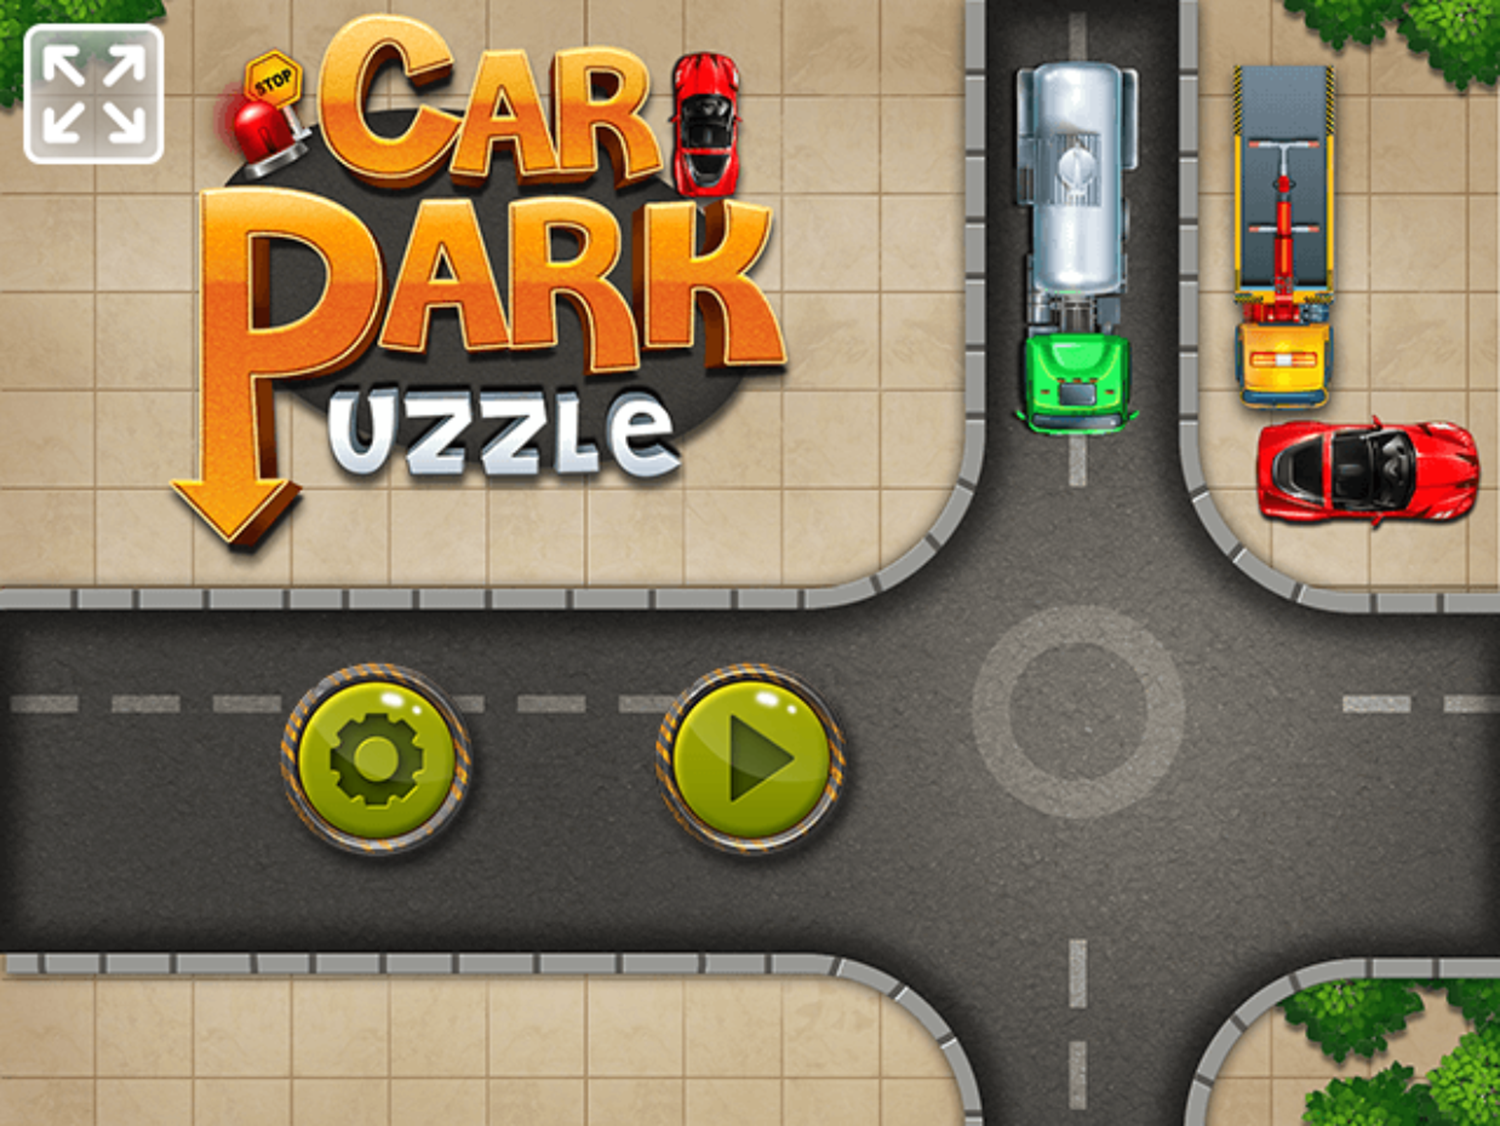 Car Park Puzzle Game Welcome Screen Screenshot.